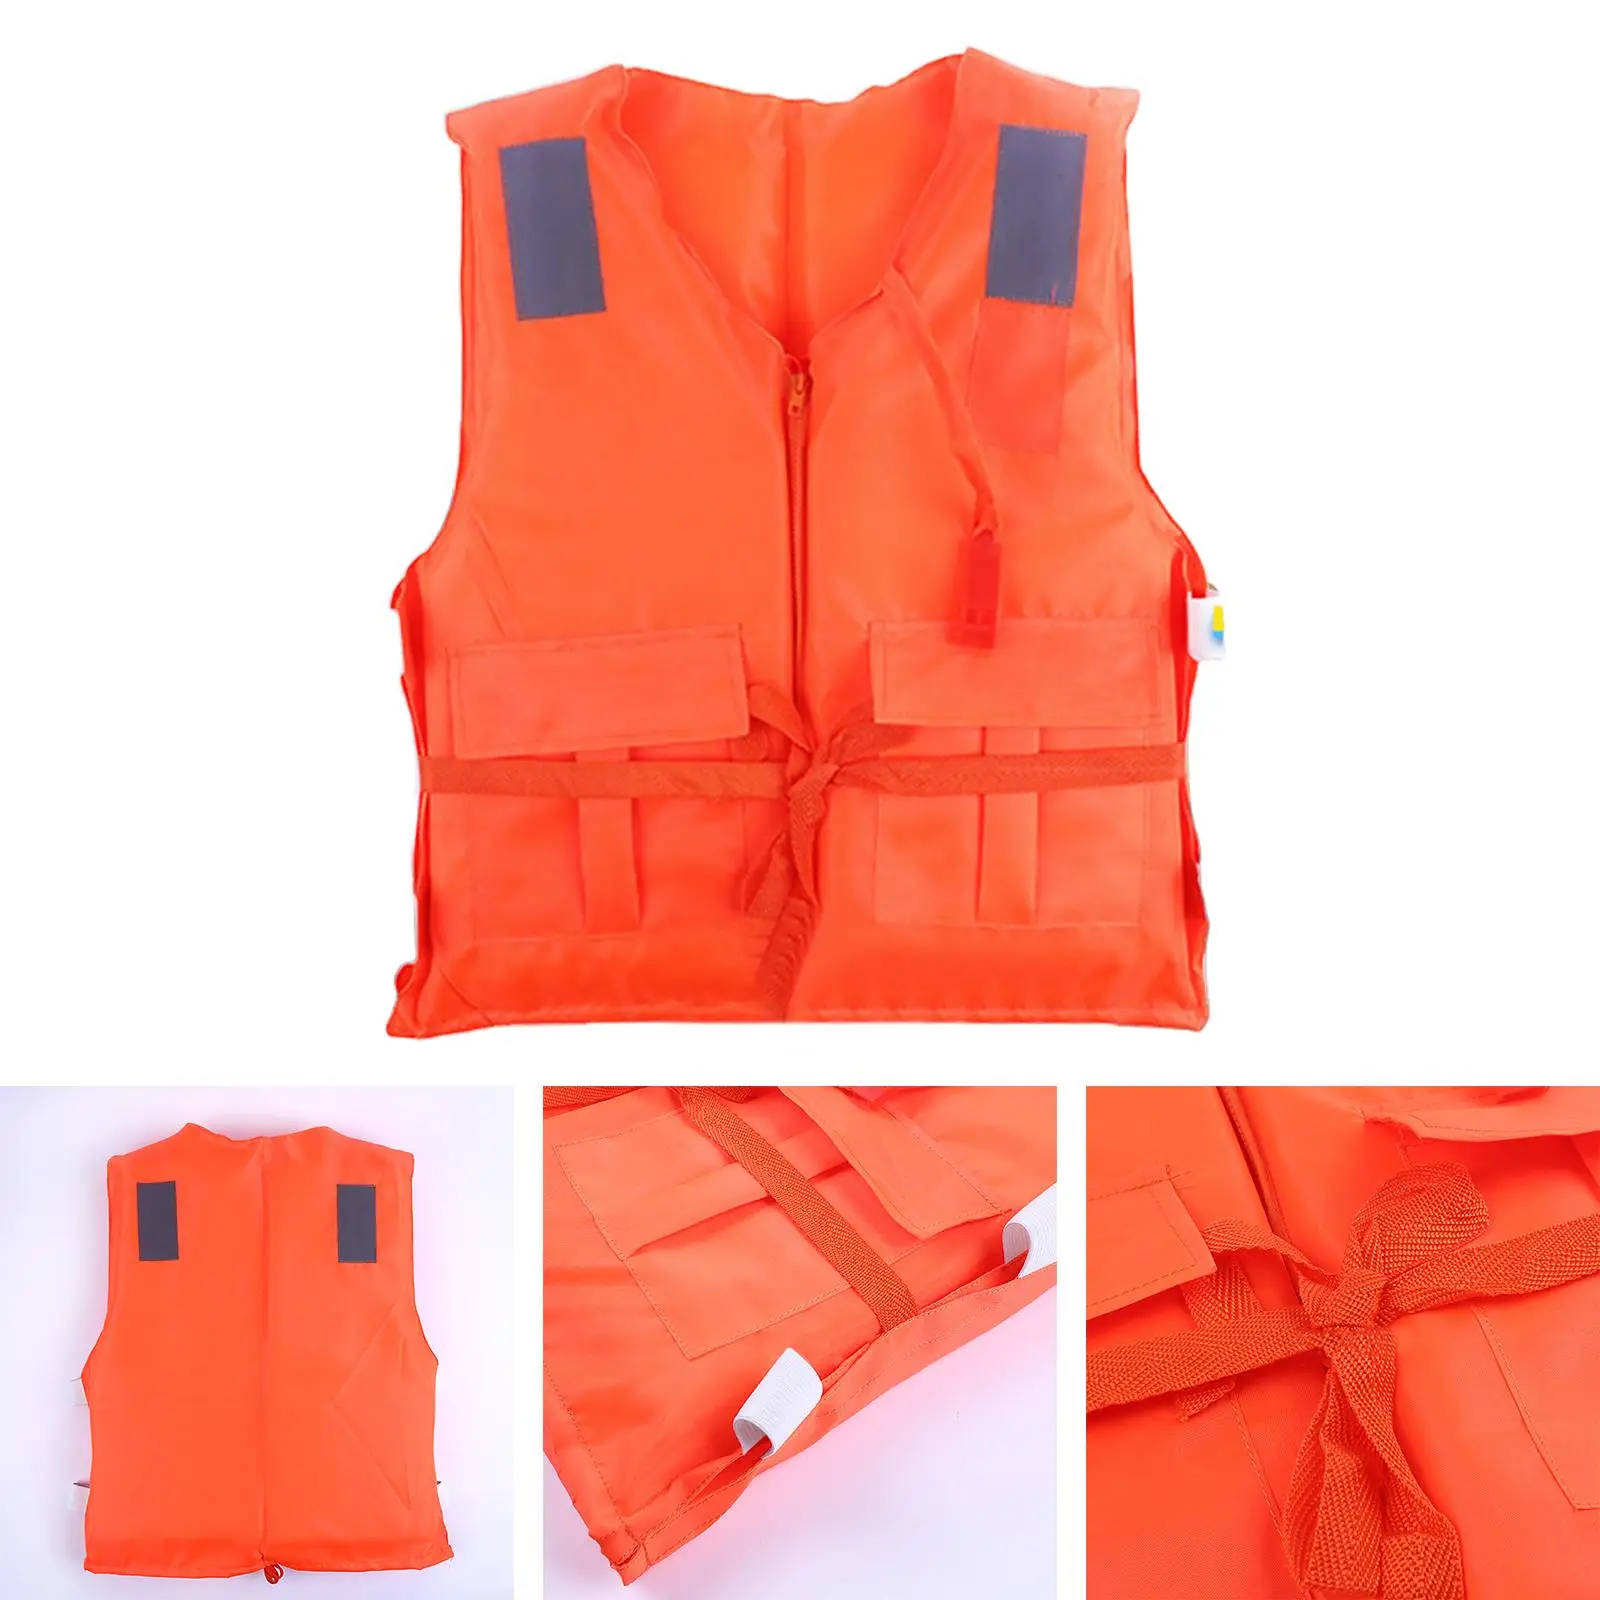 Drifting Life Jacket Swimming Life Vest Adults for Boating Surfing Sailing